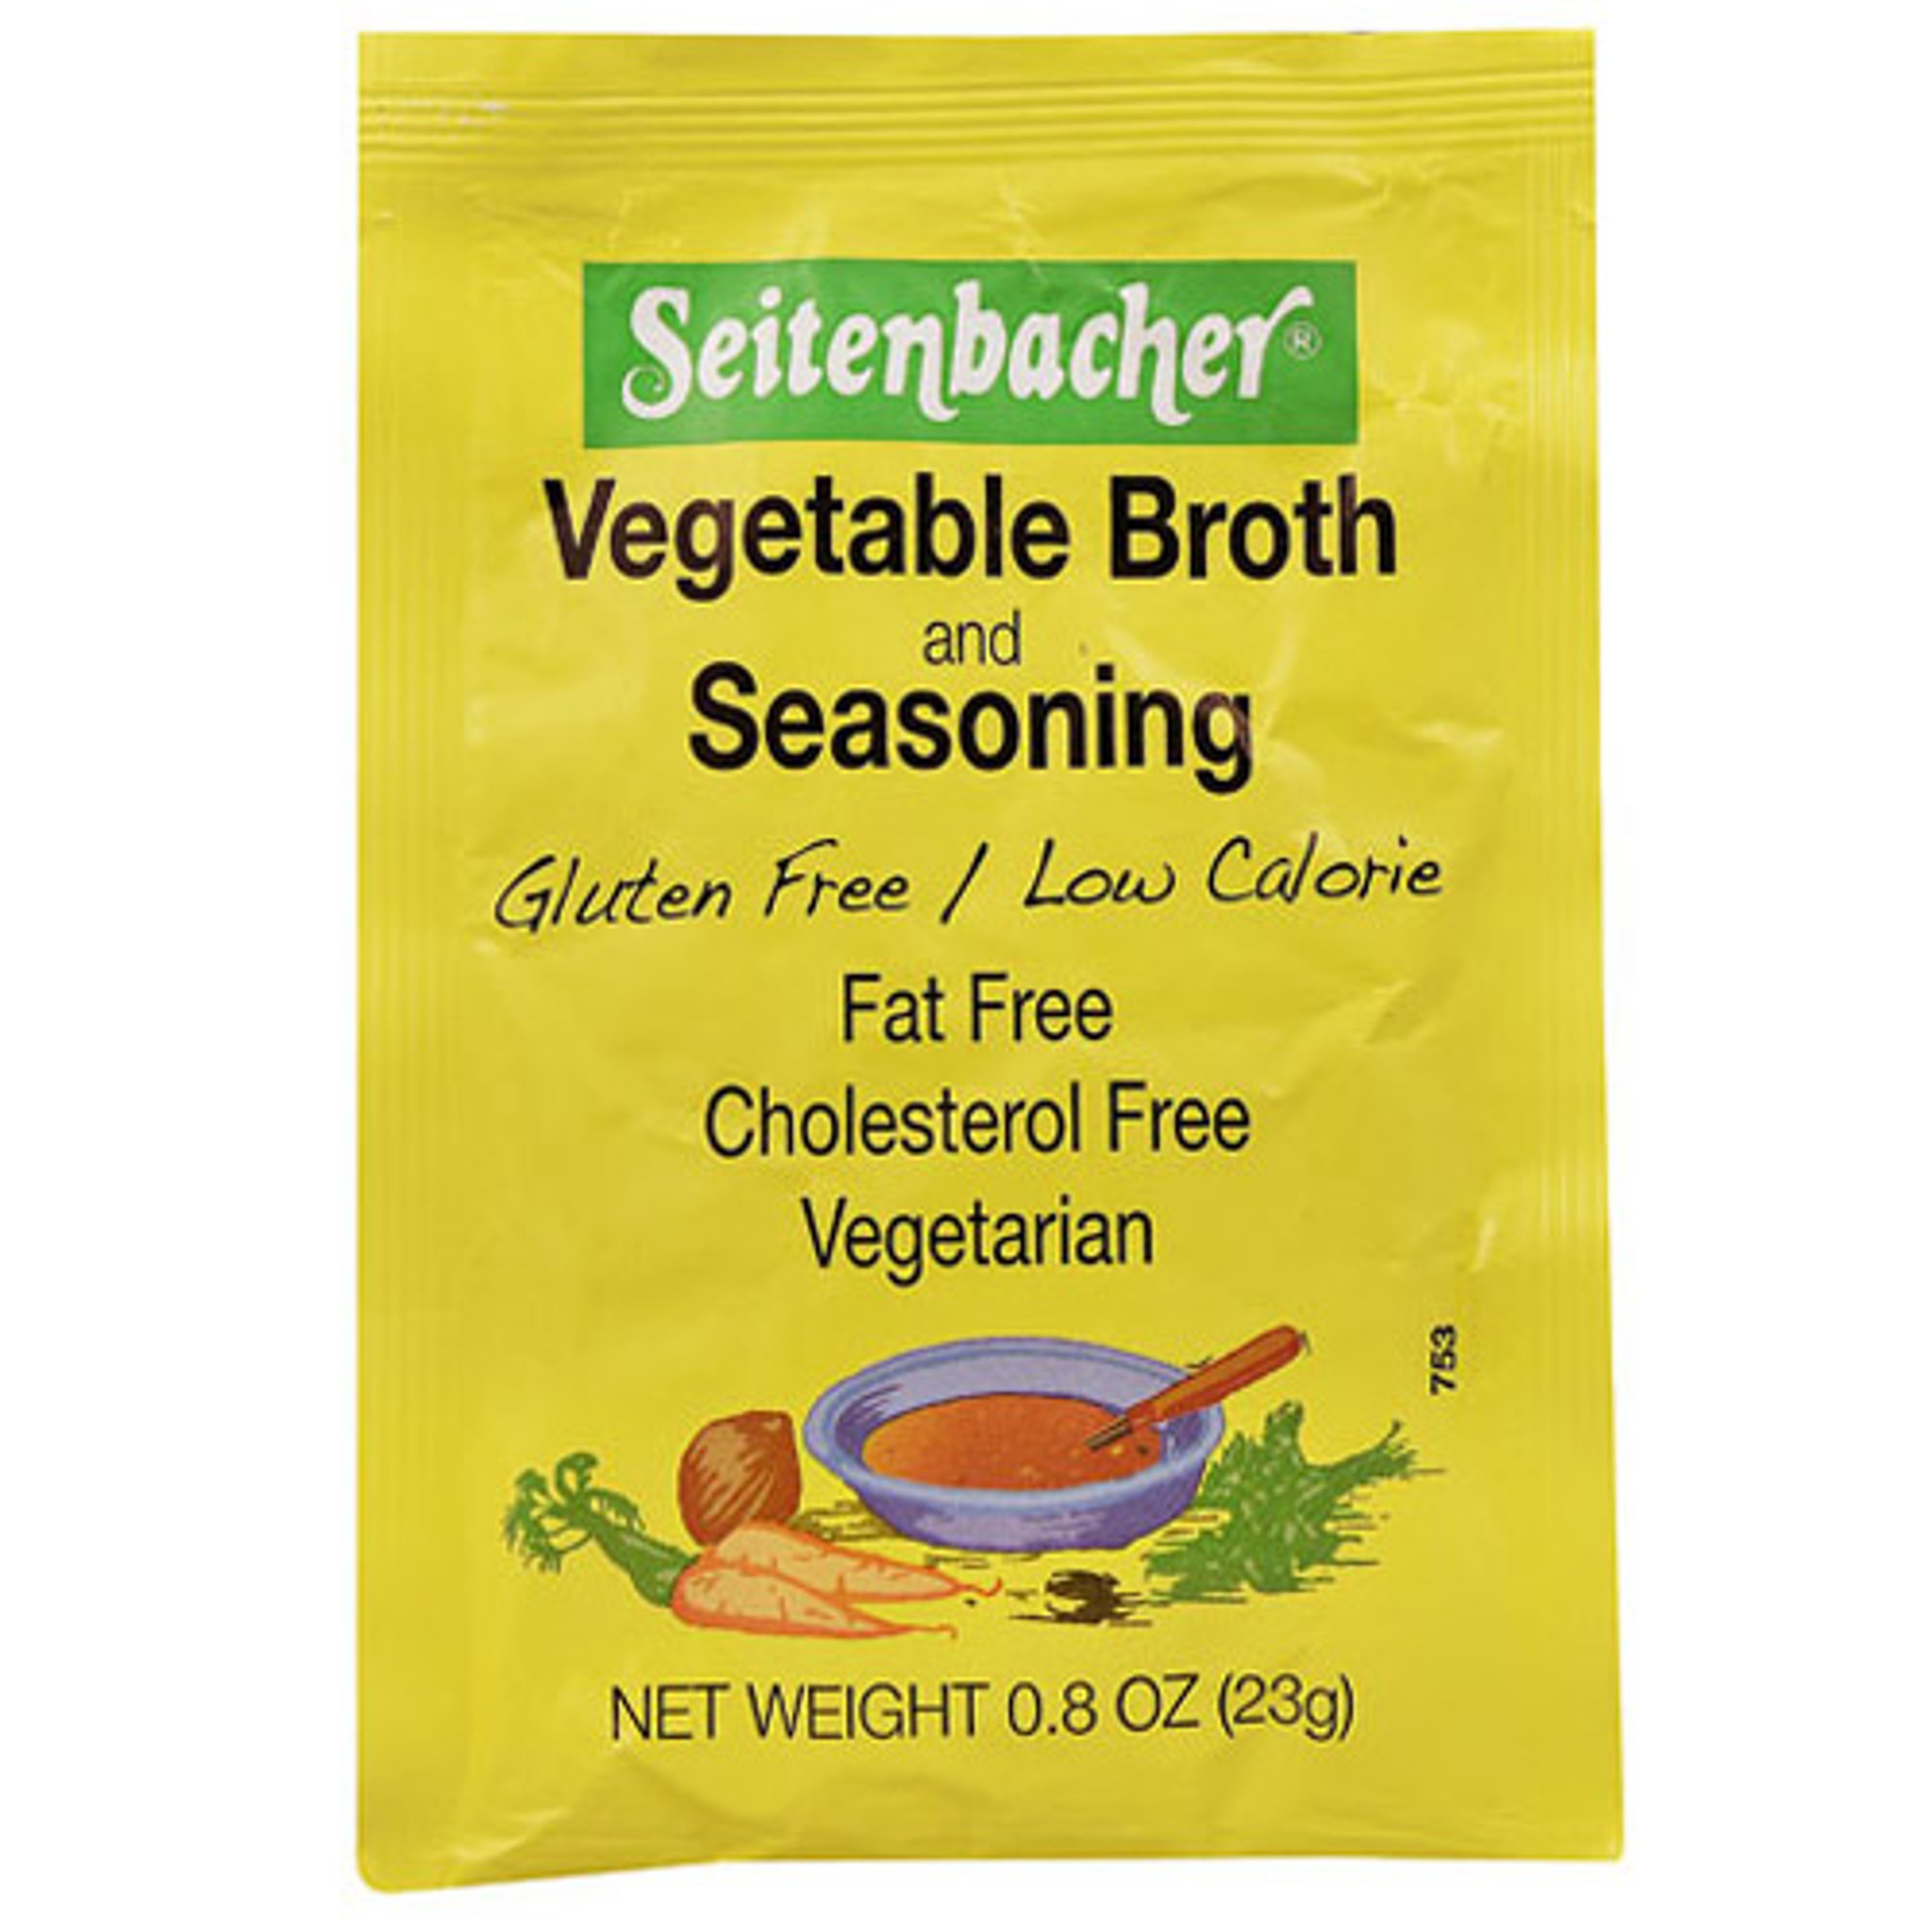 https://cdn11.bigcommerce.com/s-69ec9/images/stencil/2048x2048/products/1290/1668/Seitenbacher-Vegetable-Broth-and-Seasoning__09405.1649456612.jpg?c=2